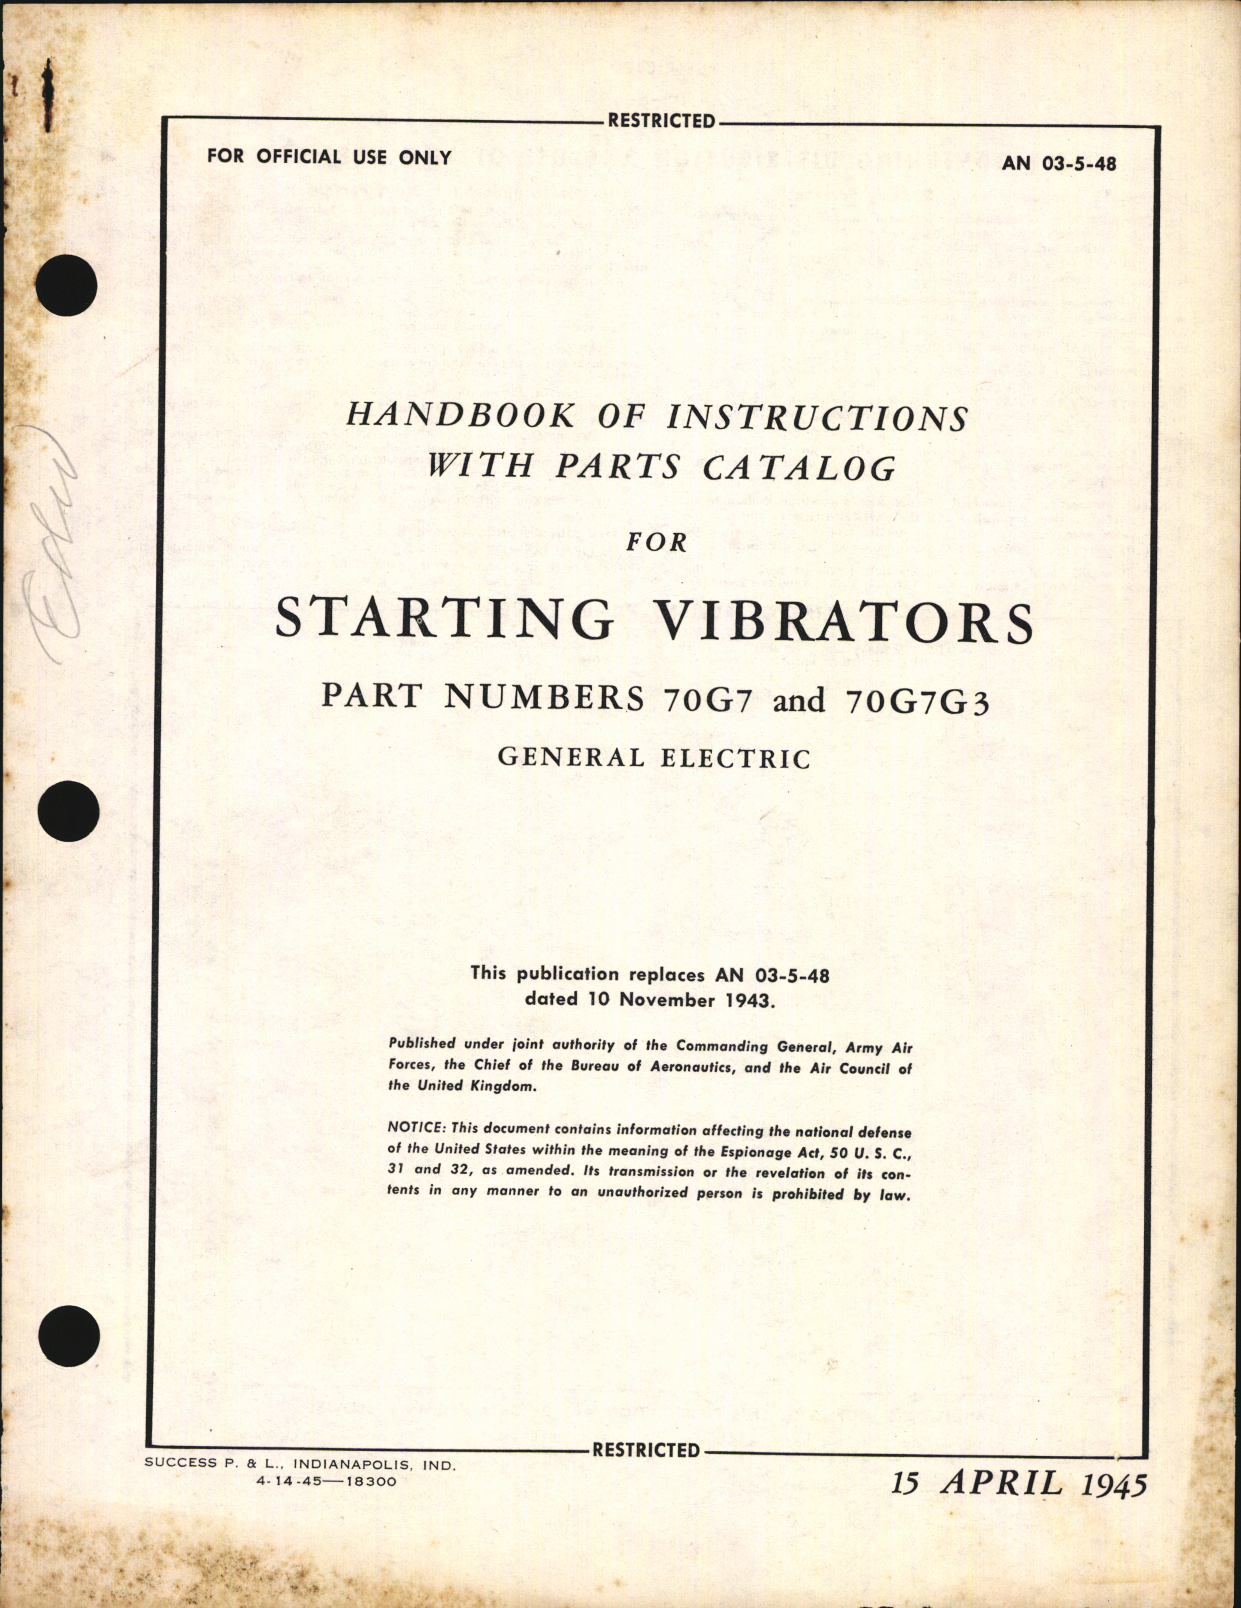 Sample page 1 from AirCorps Library document: Handbook of Instructions with Parts Catalog for Starting Vibrators 70G7 and 70G7G3